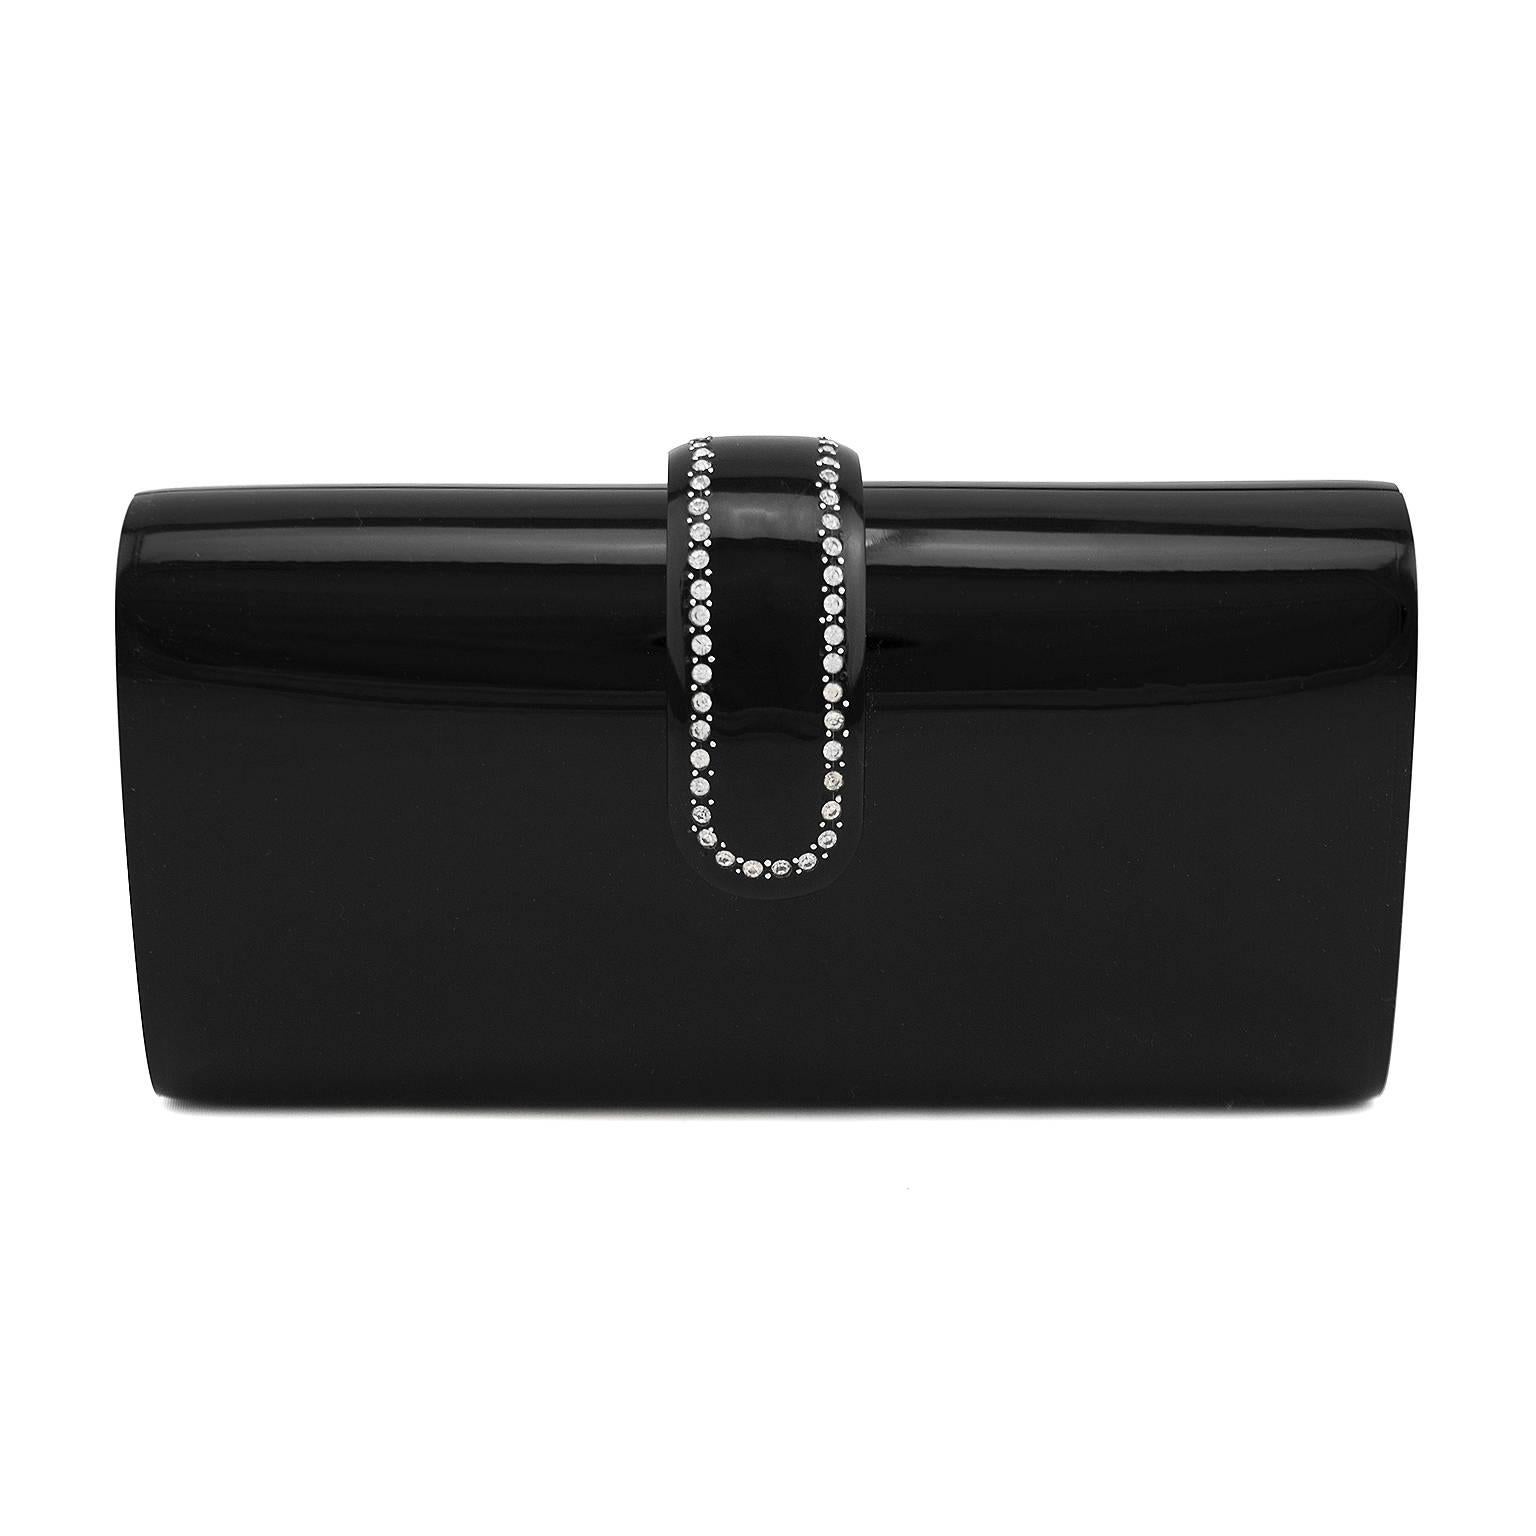 Elegant and sleek 1960s black resin rounded rectangle evening clutch. Interesting swivel claw closure, embellished with rhinestones. Clean black velvet interior. Fits an iPhone. Excellent vintage condition. Perfect for the holiday season, dinner and